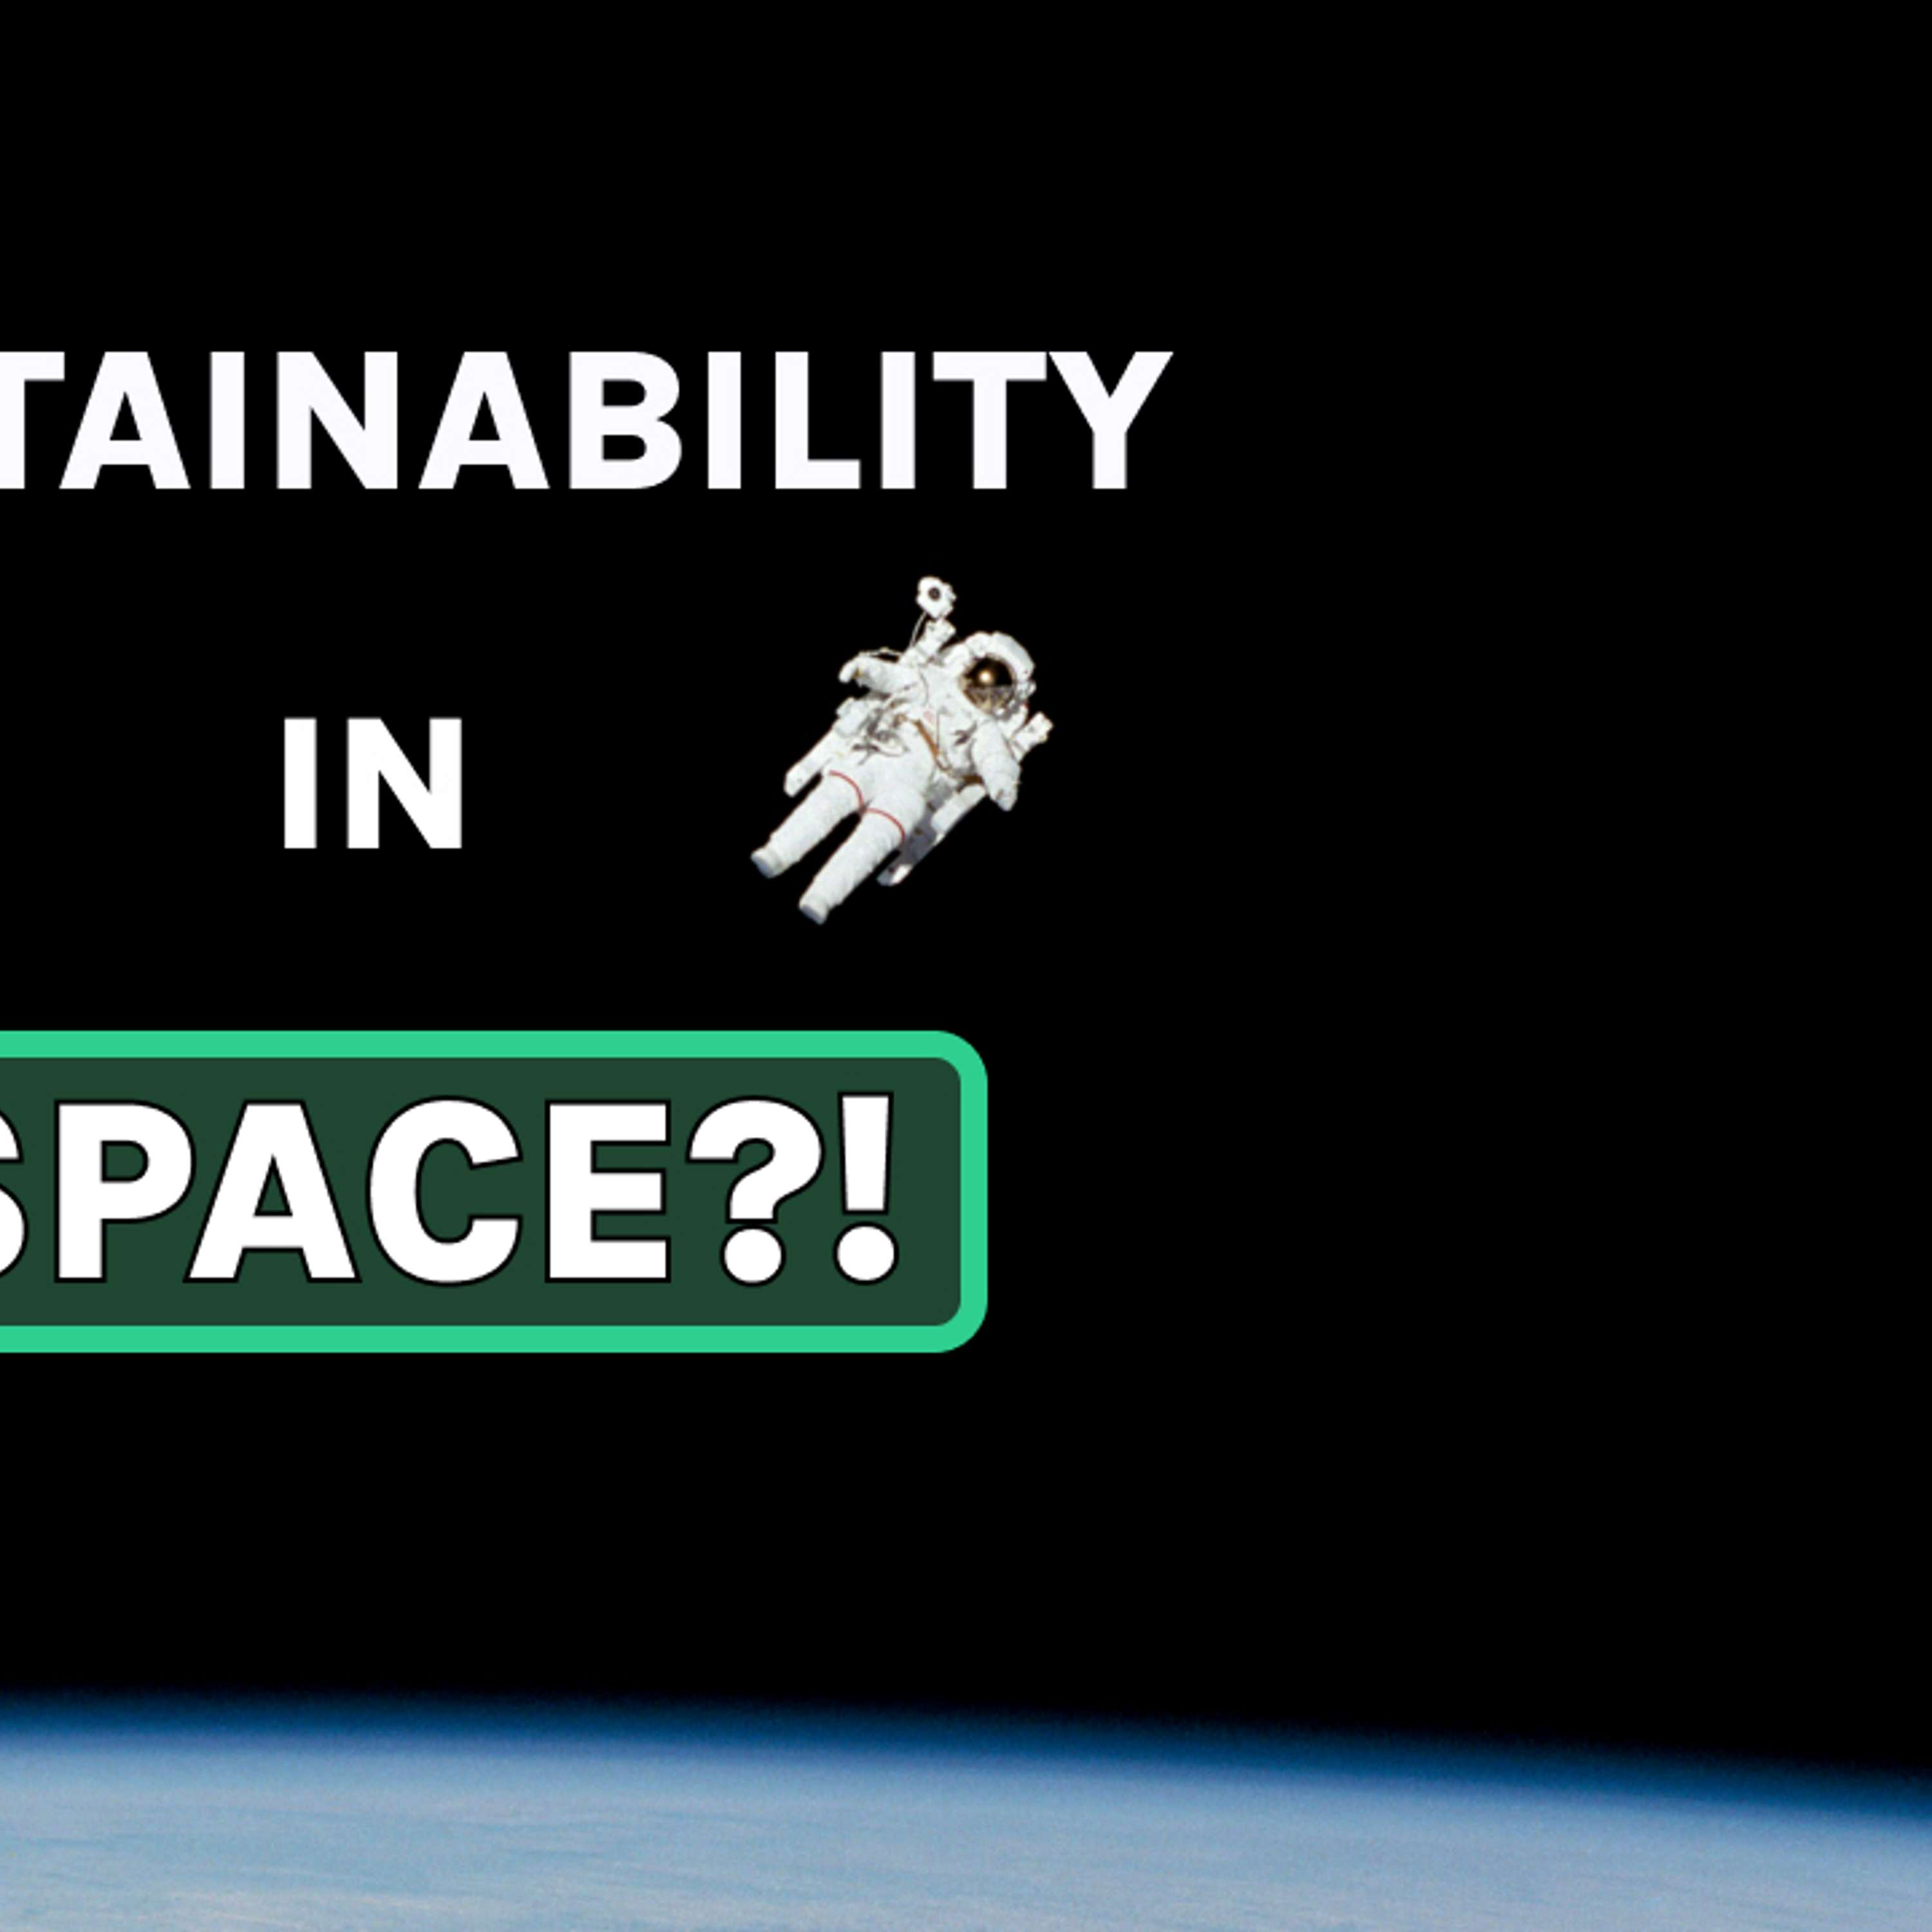 S4E10 'Sustainability and Space?!', with Ryan Laird 👽